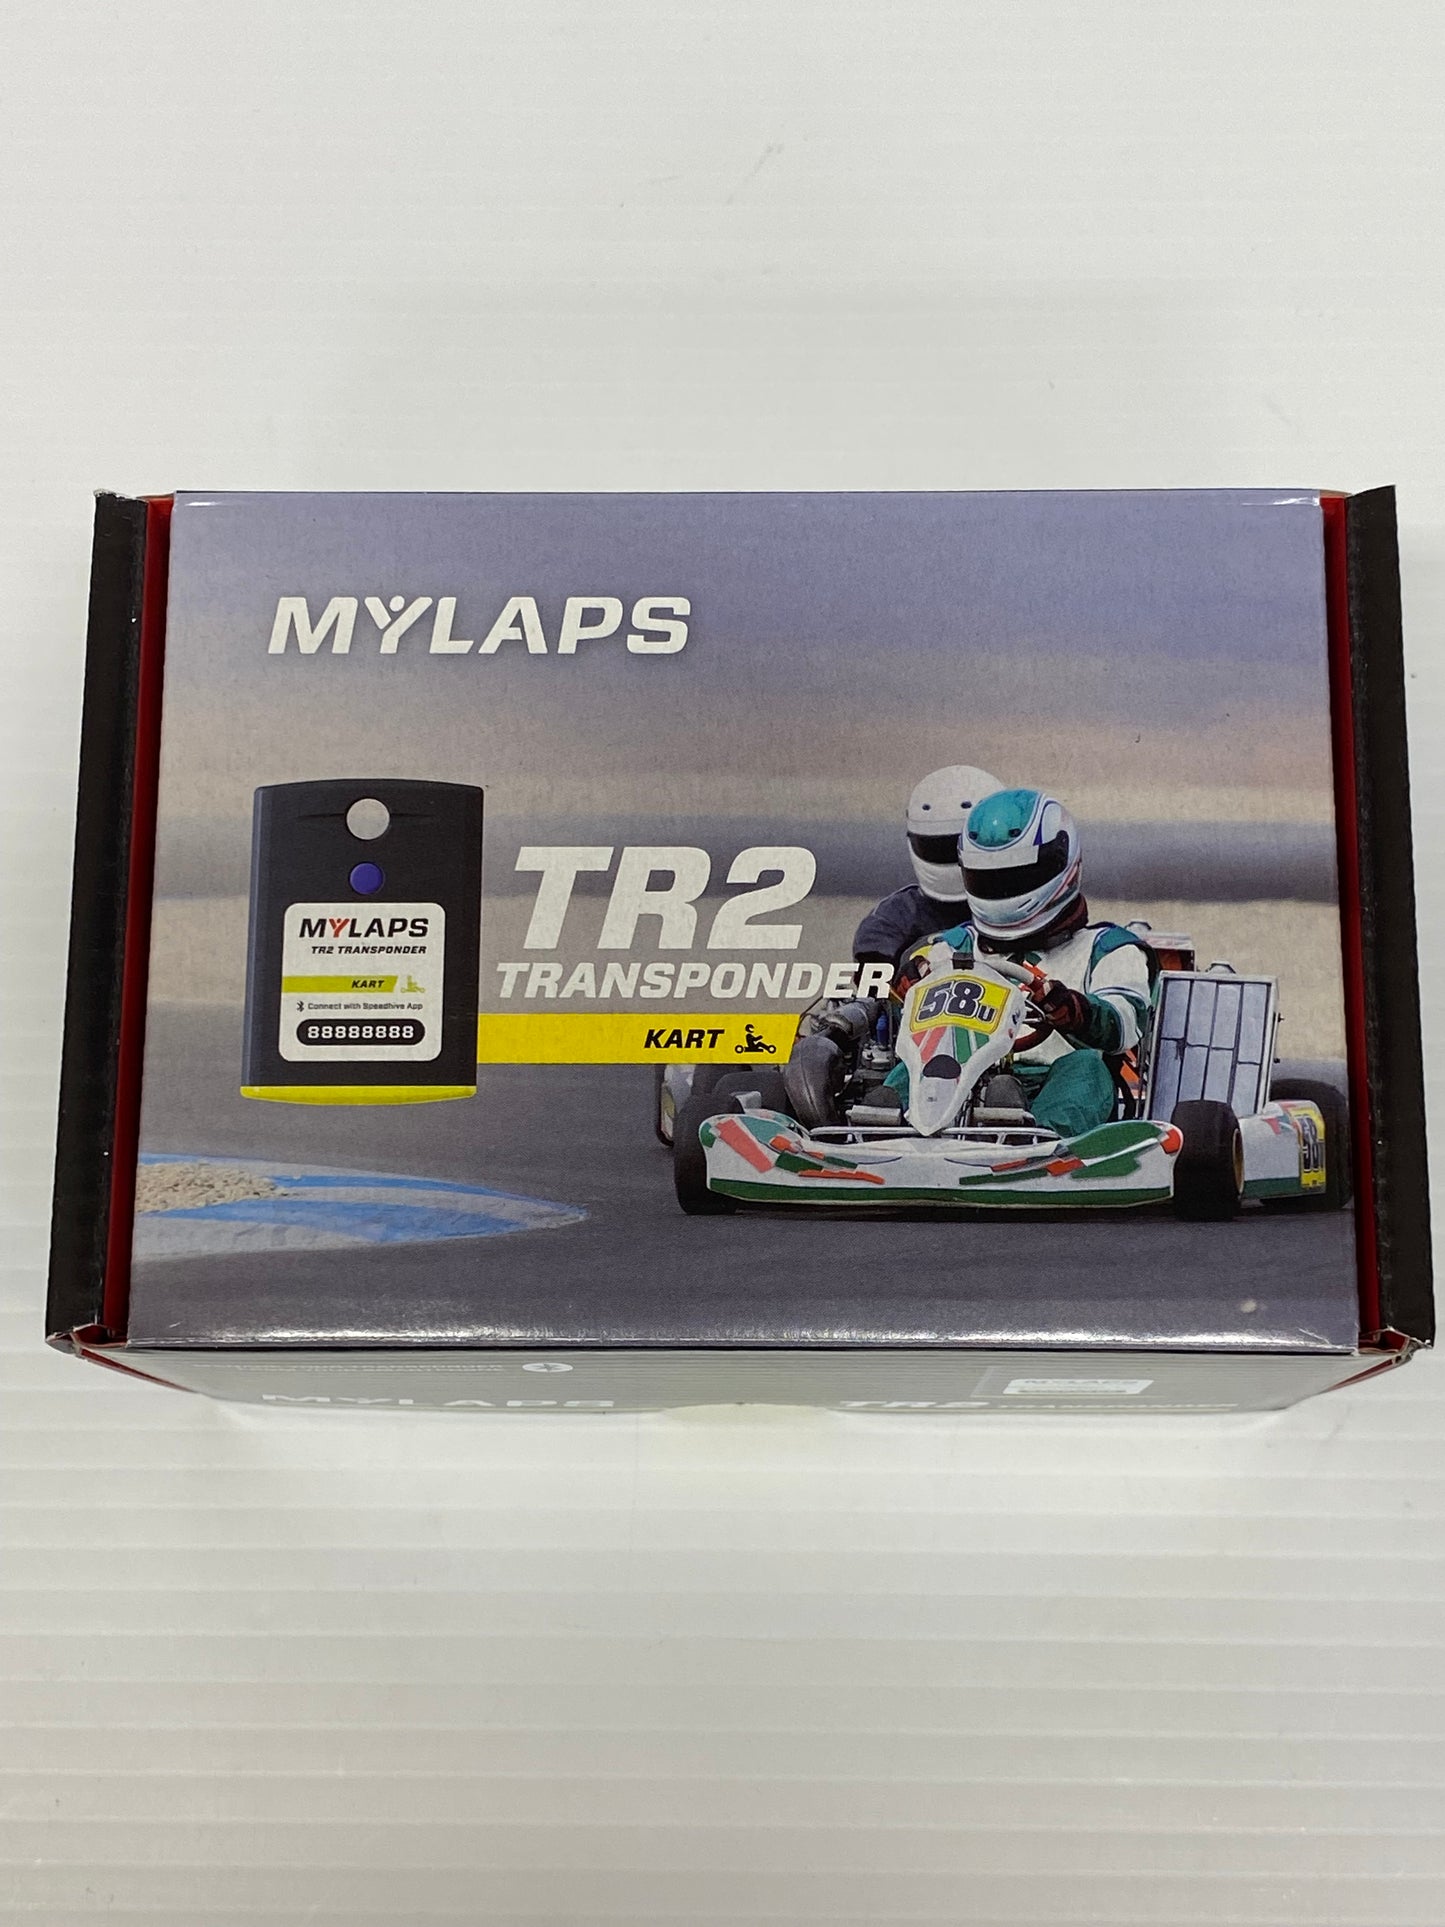 MYLAPS Karting Transponder -With 1 Year Subscription